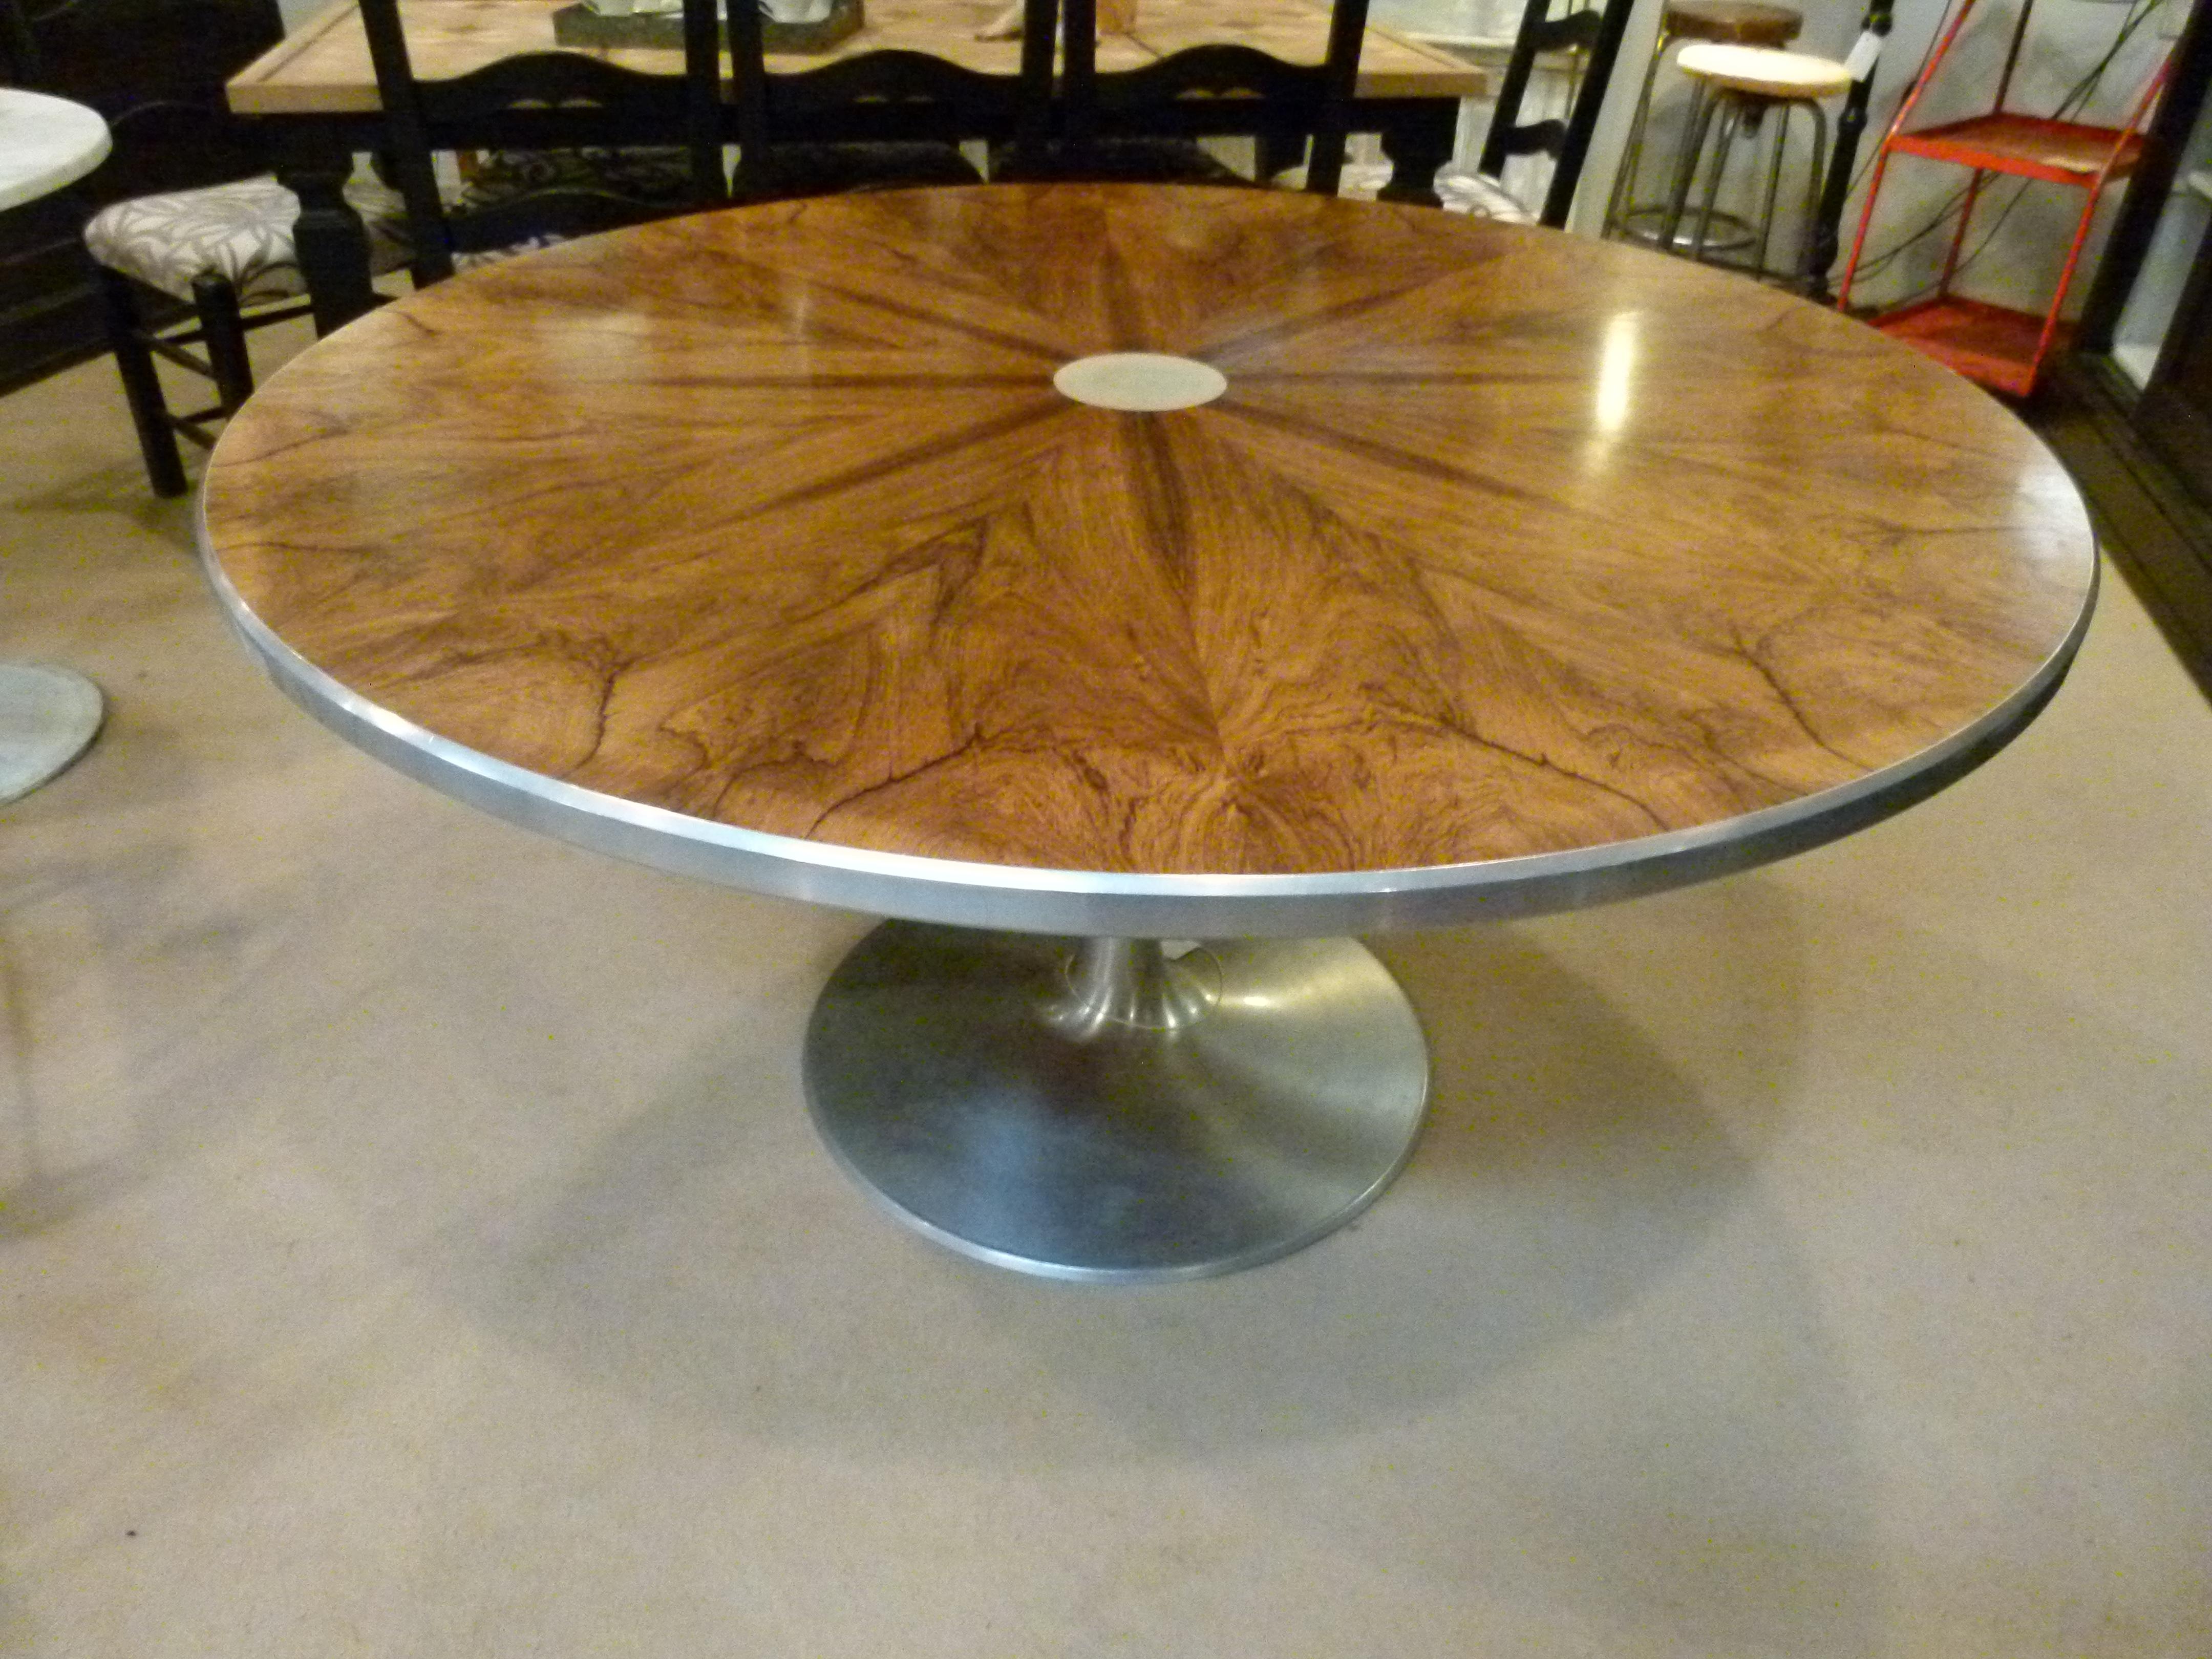 A beautiful dining or center table with a rosewood sequence matched veneer top in a radiating pattern around an inlet aluminium circle, with aluminium trim and aluminium pedestal extending into a round base.
Designed by Steen Ostergaard for Poul